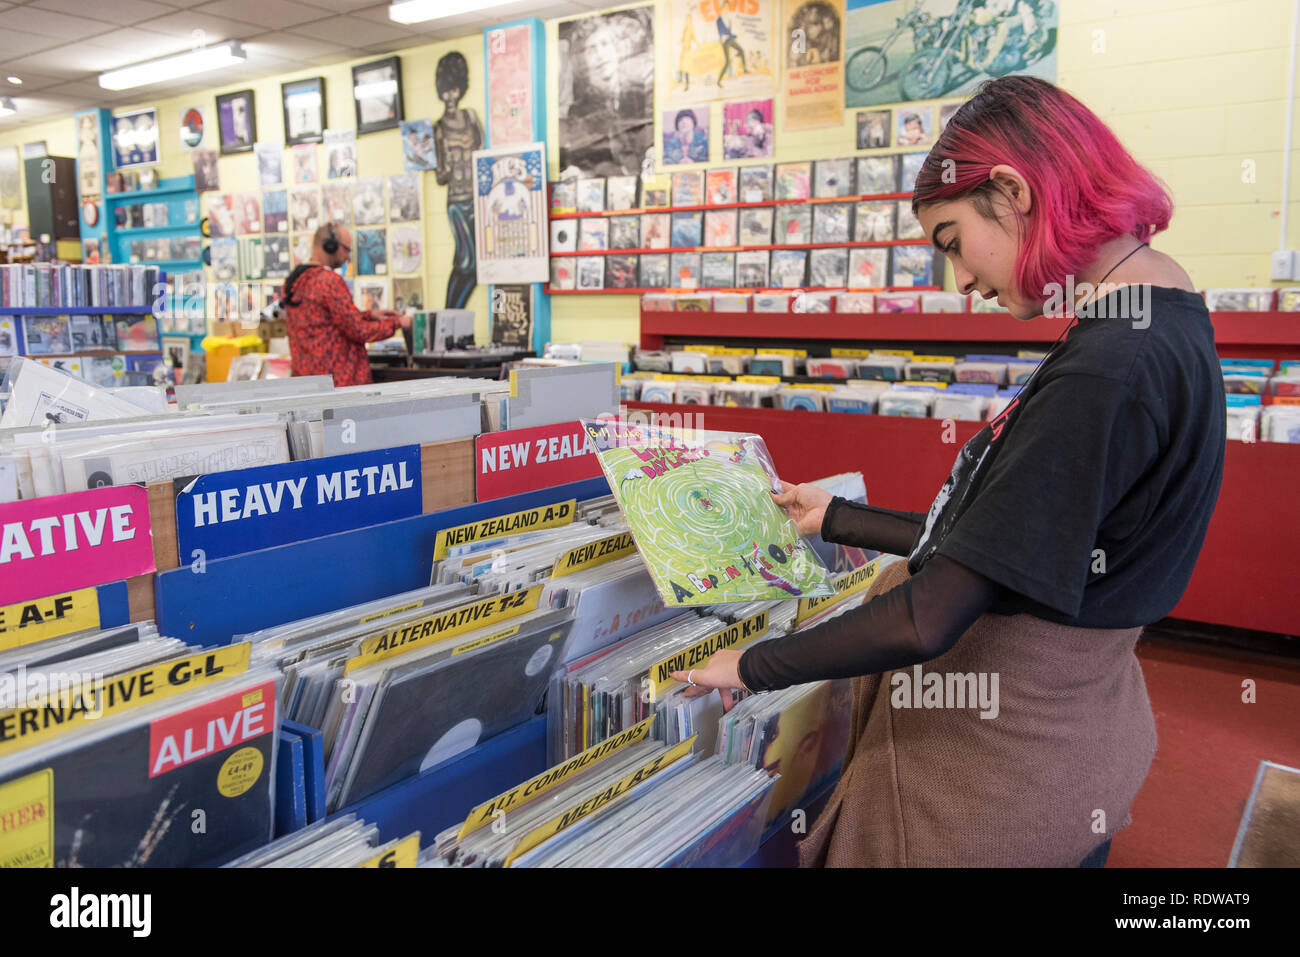 Slow Boat Records is a popular music shop which sells new and used CDs, DVDs, and records and is located on Cuba Street in downtown Wellington, New Ze Stock Photo